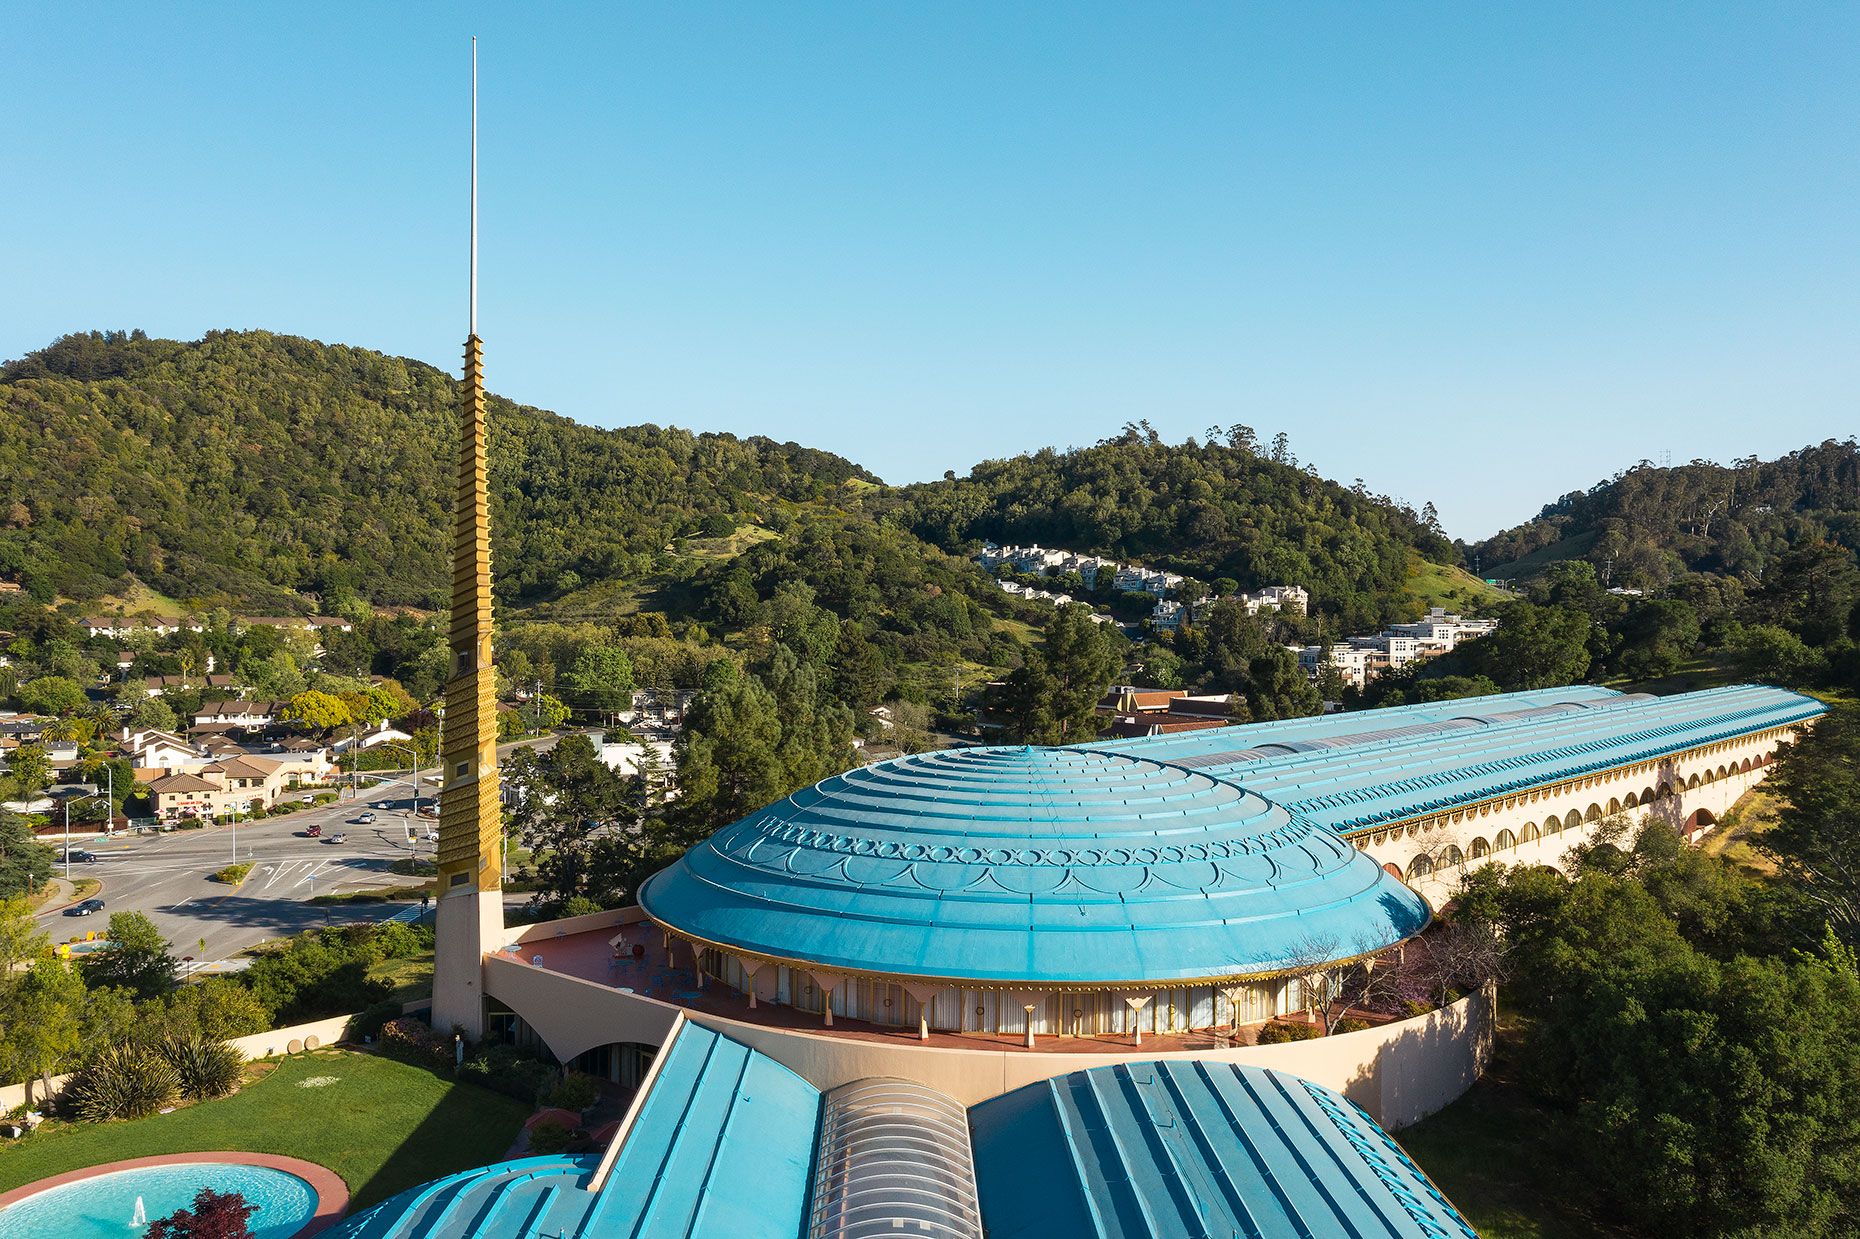 Marin County Civic Center aerial photograph by Michael Weber